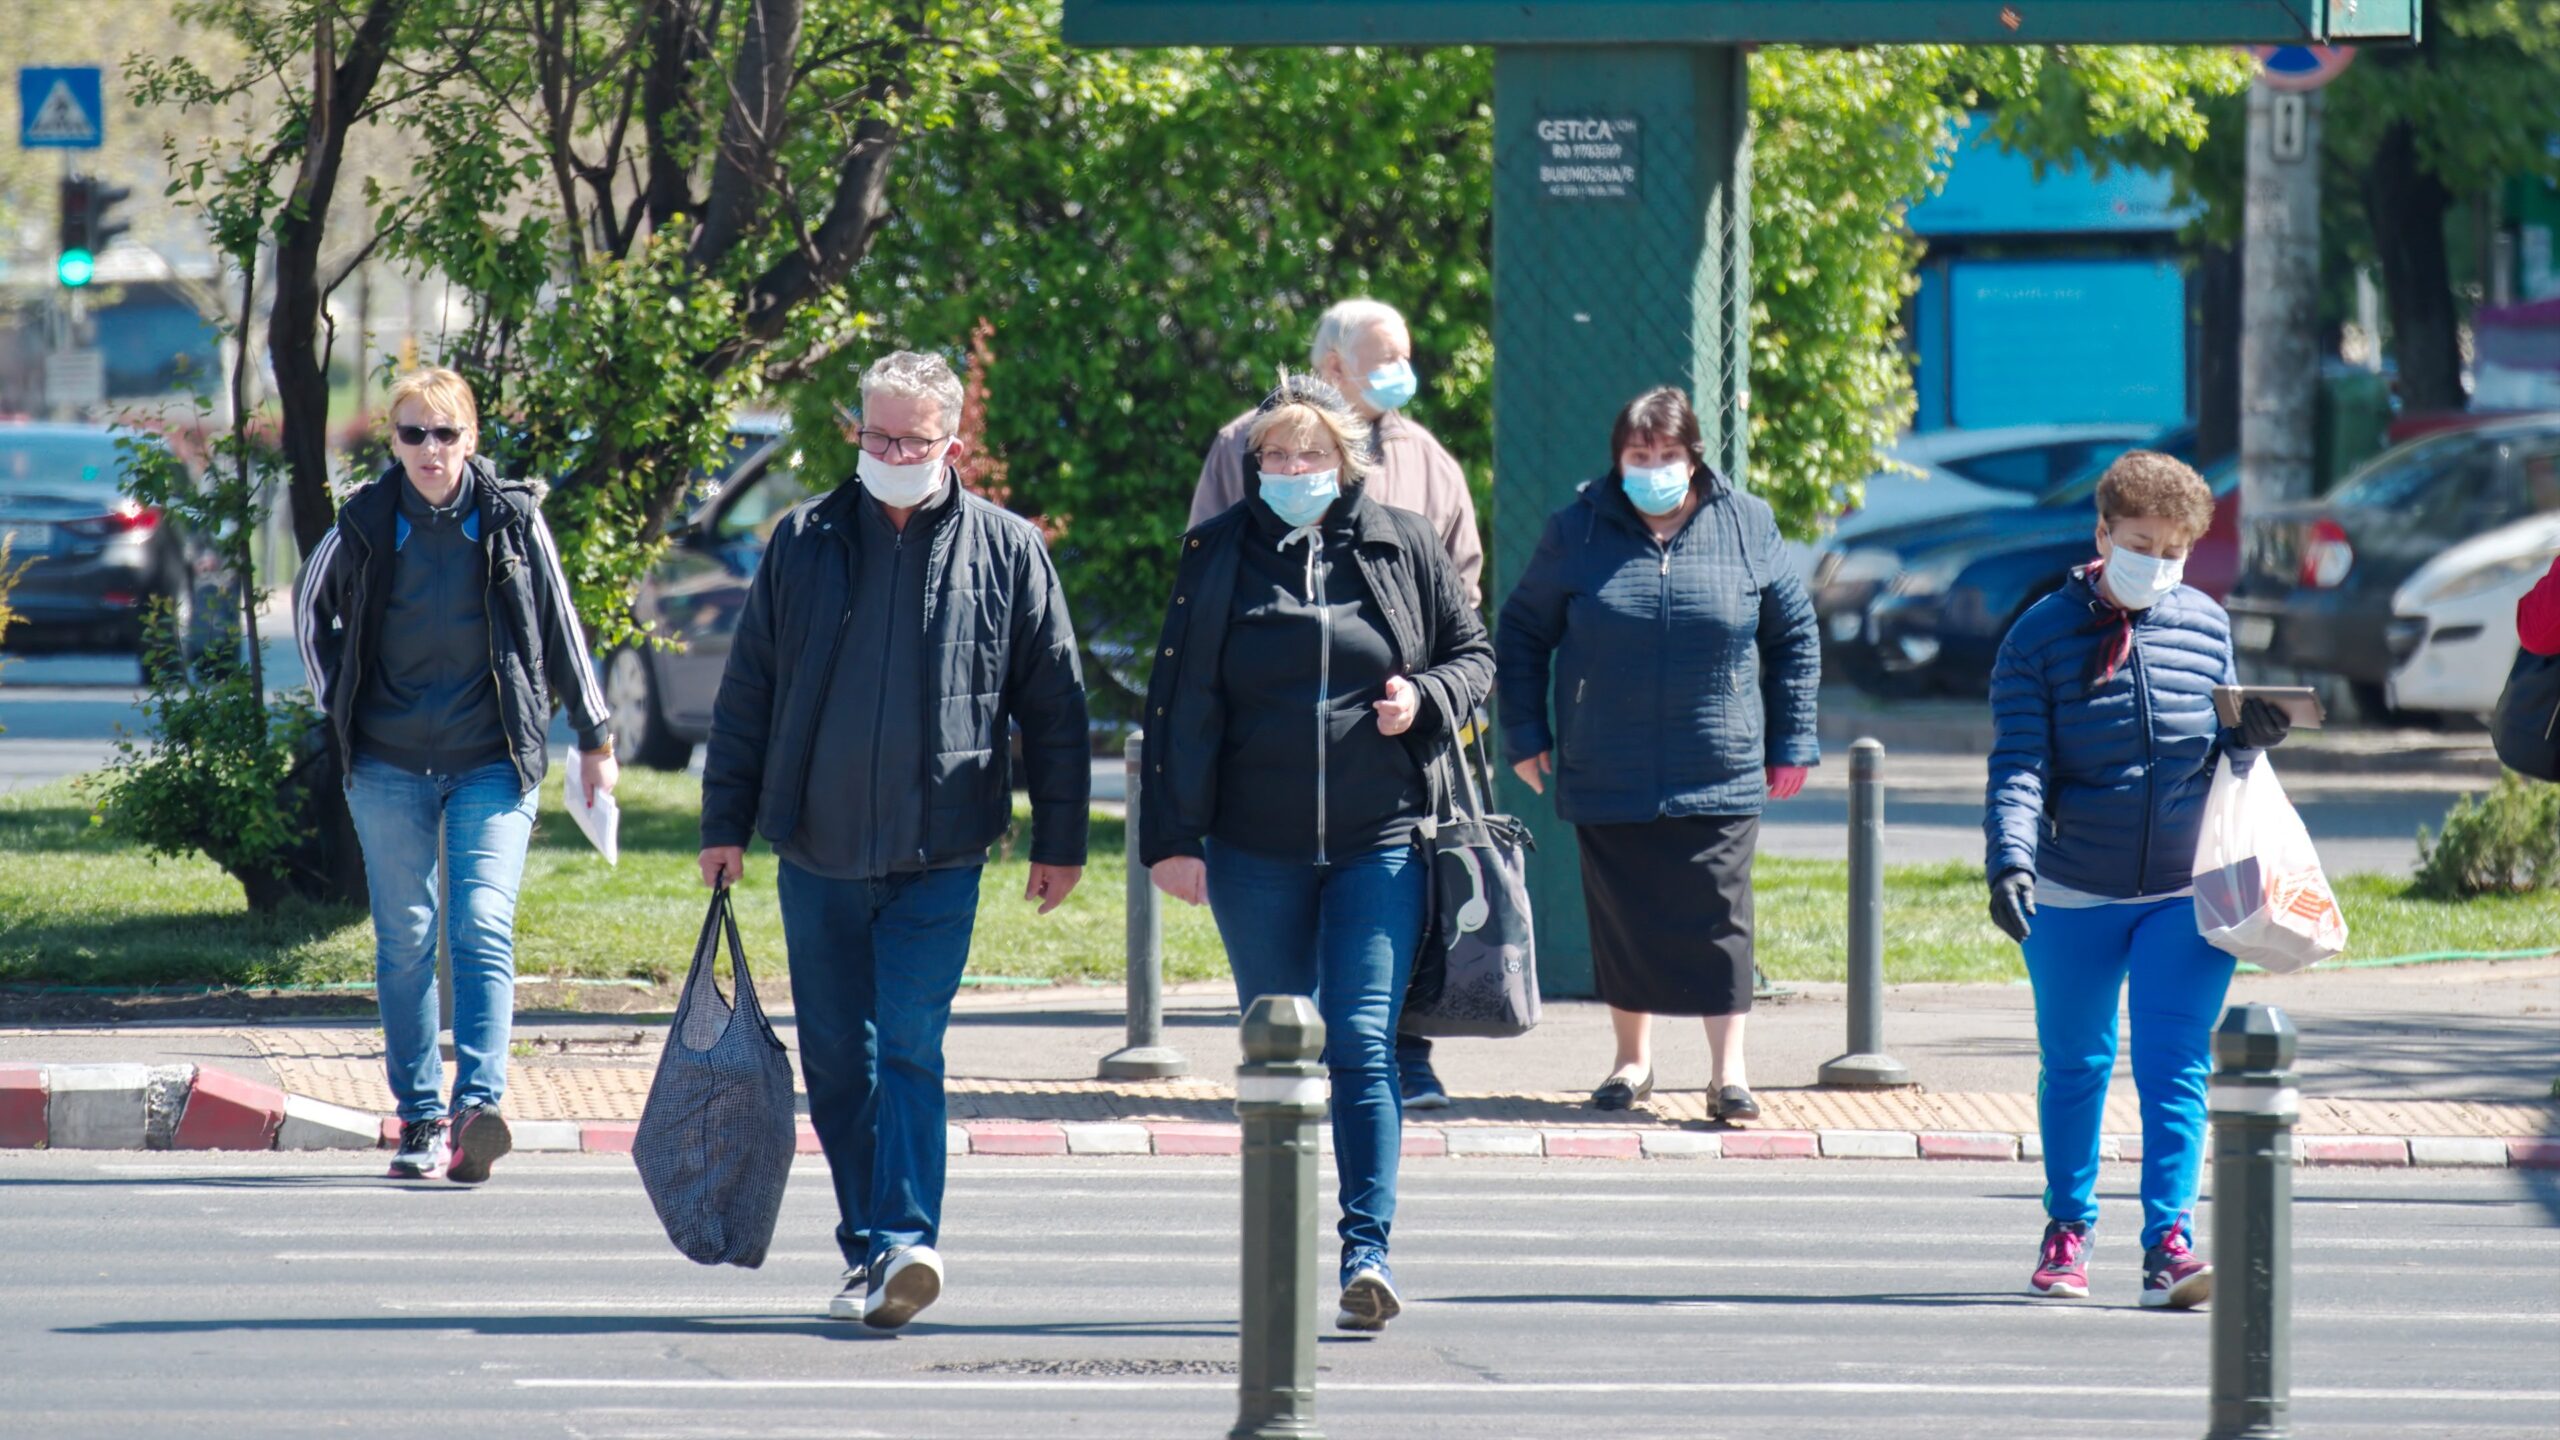 Spring of the pandemic: People wearing masks